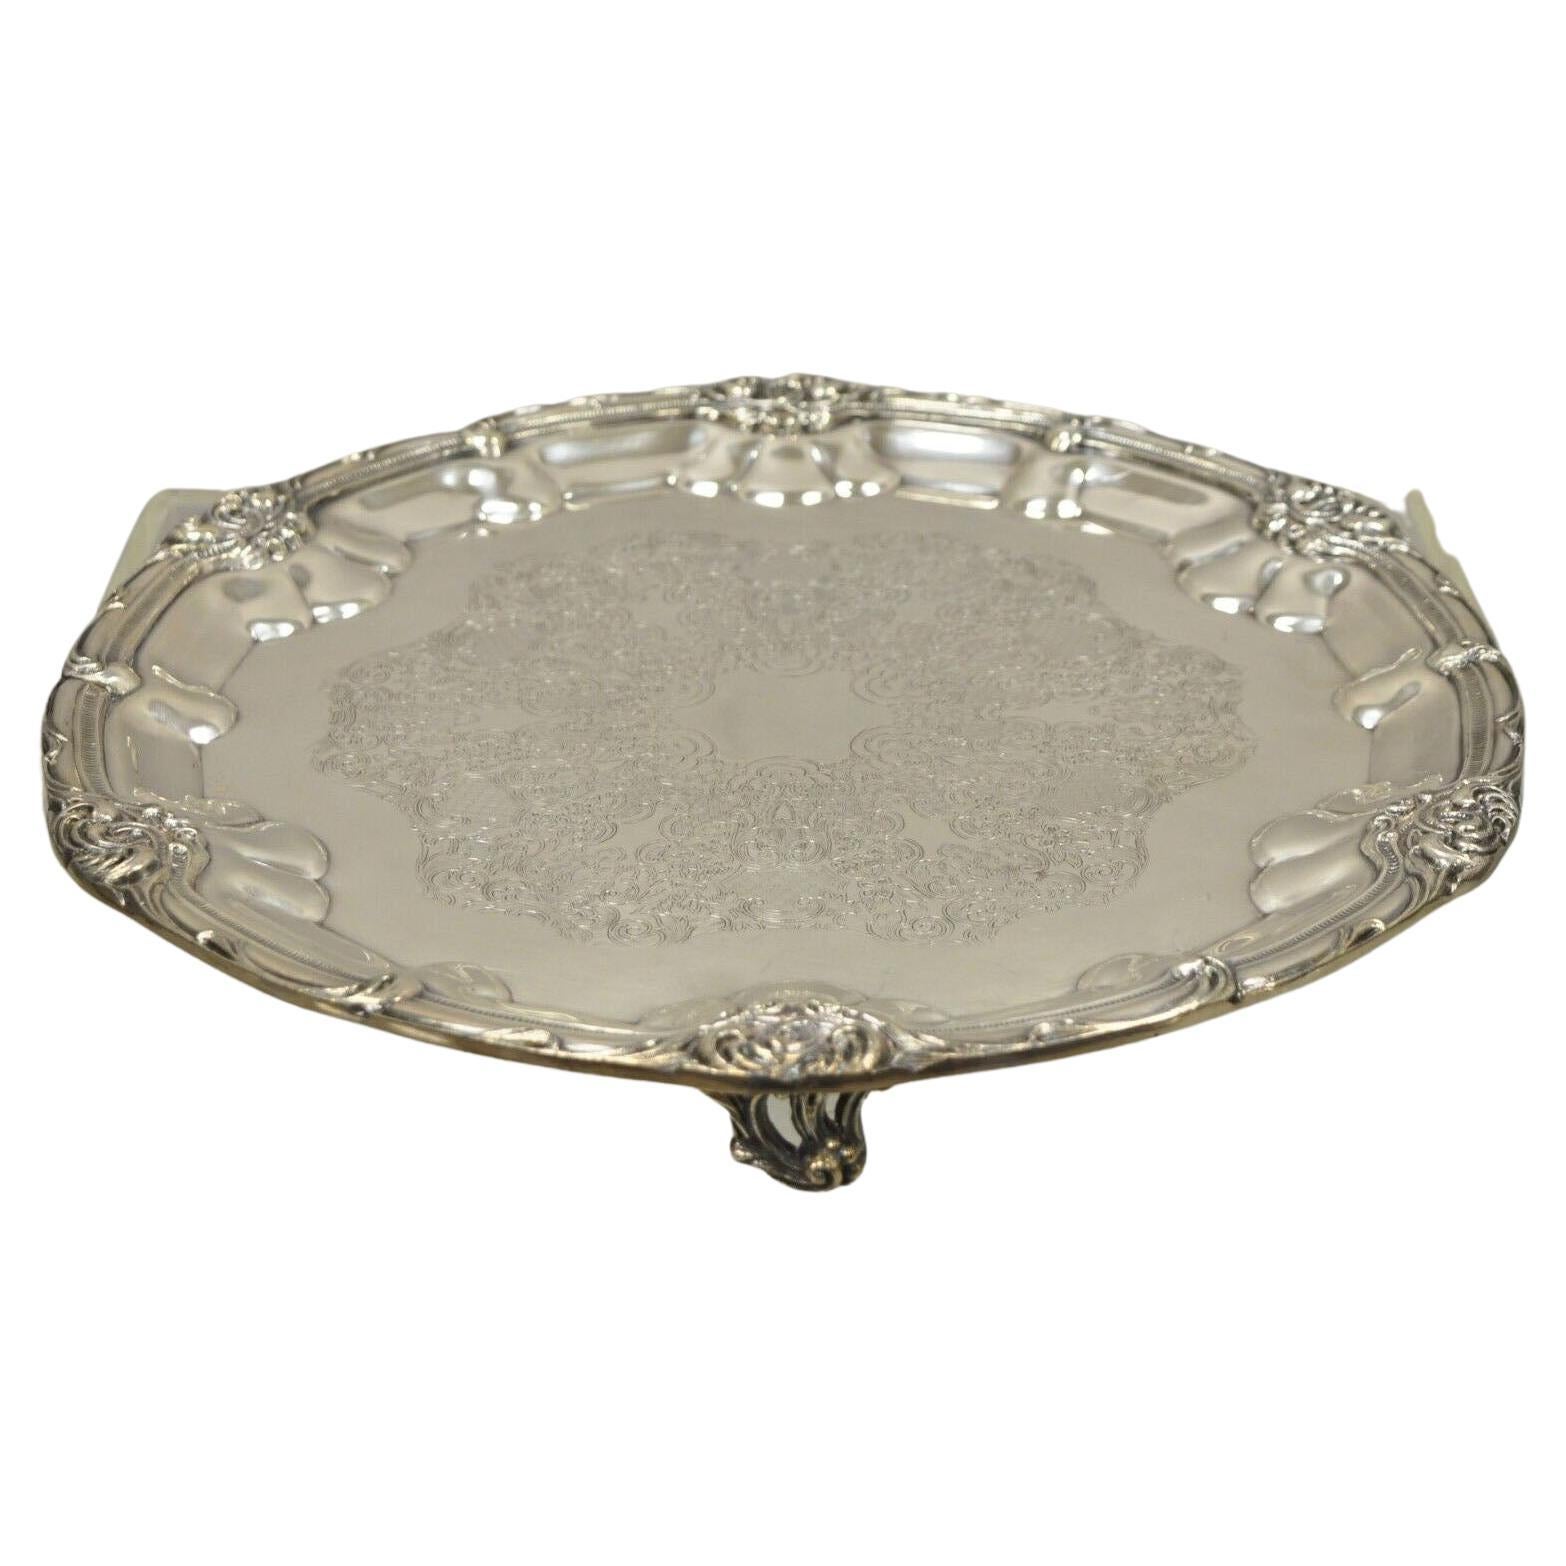 English Silver Mfg Corp Silver Plated Round Regency Style Platter Tray